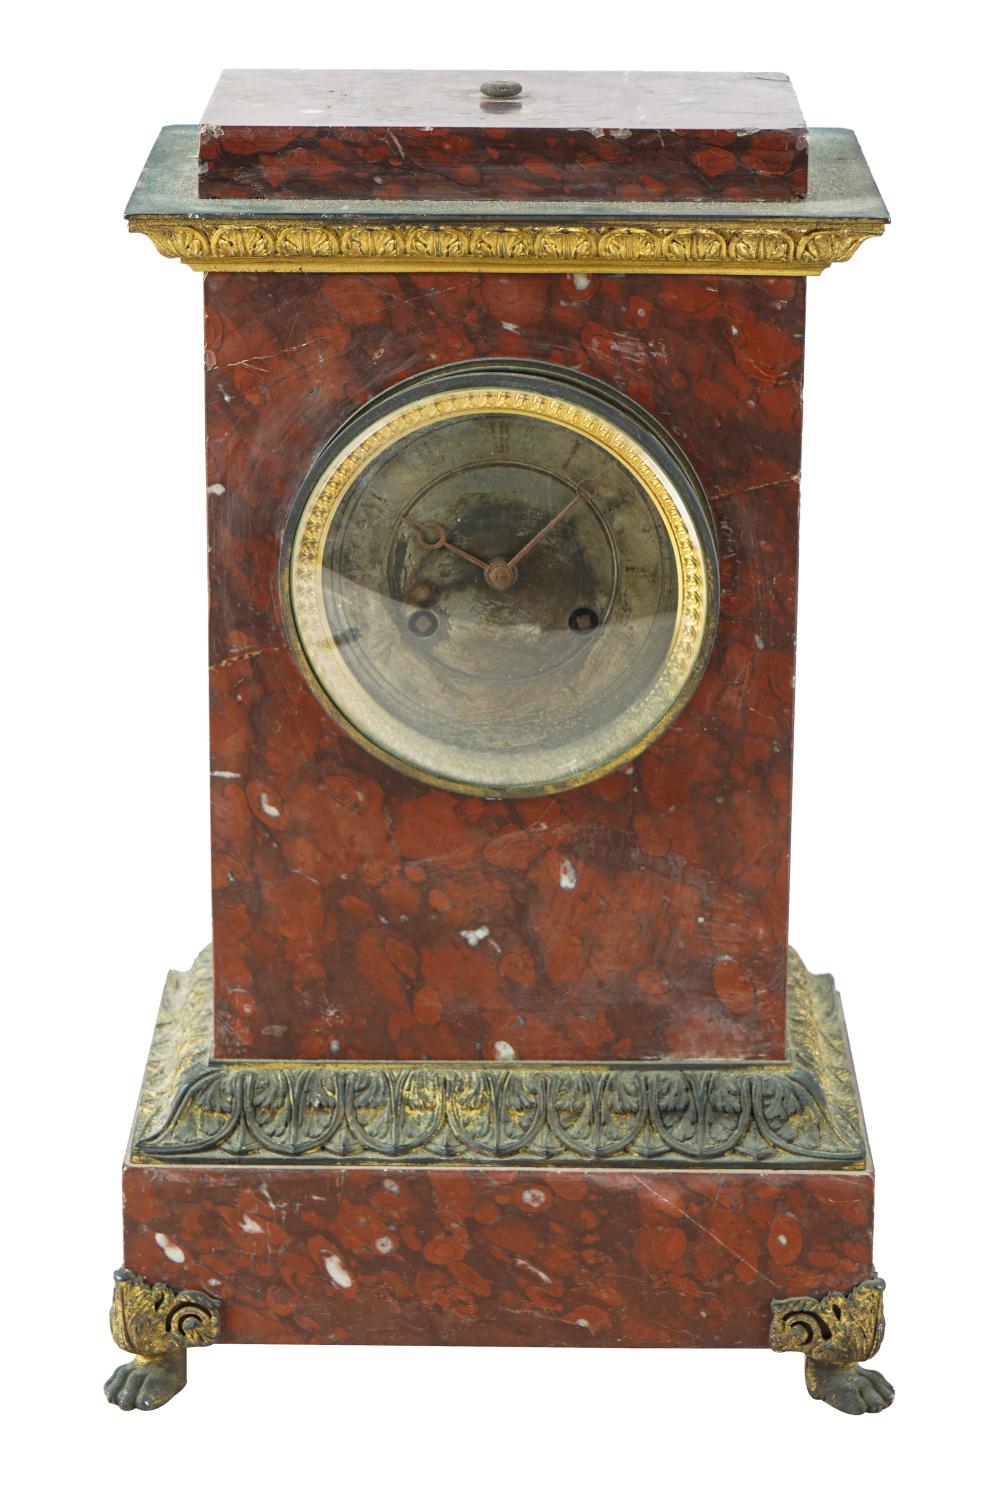 ROUGE MARBLE MANTEL CLOCKthe movement